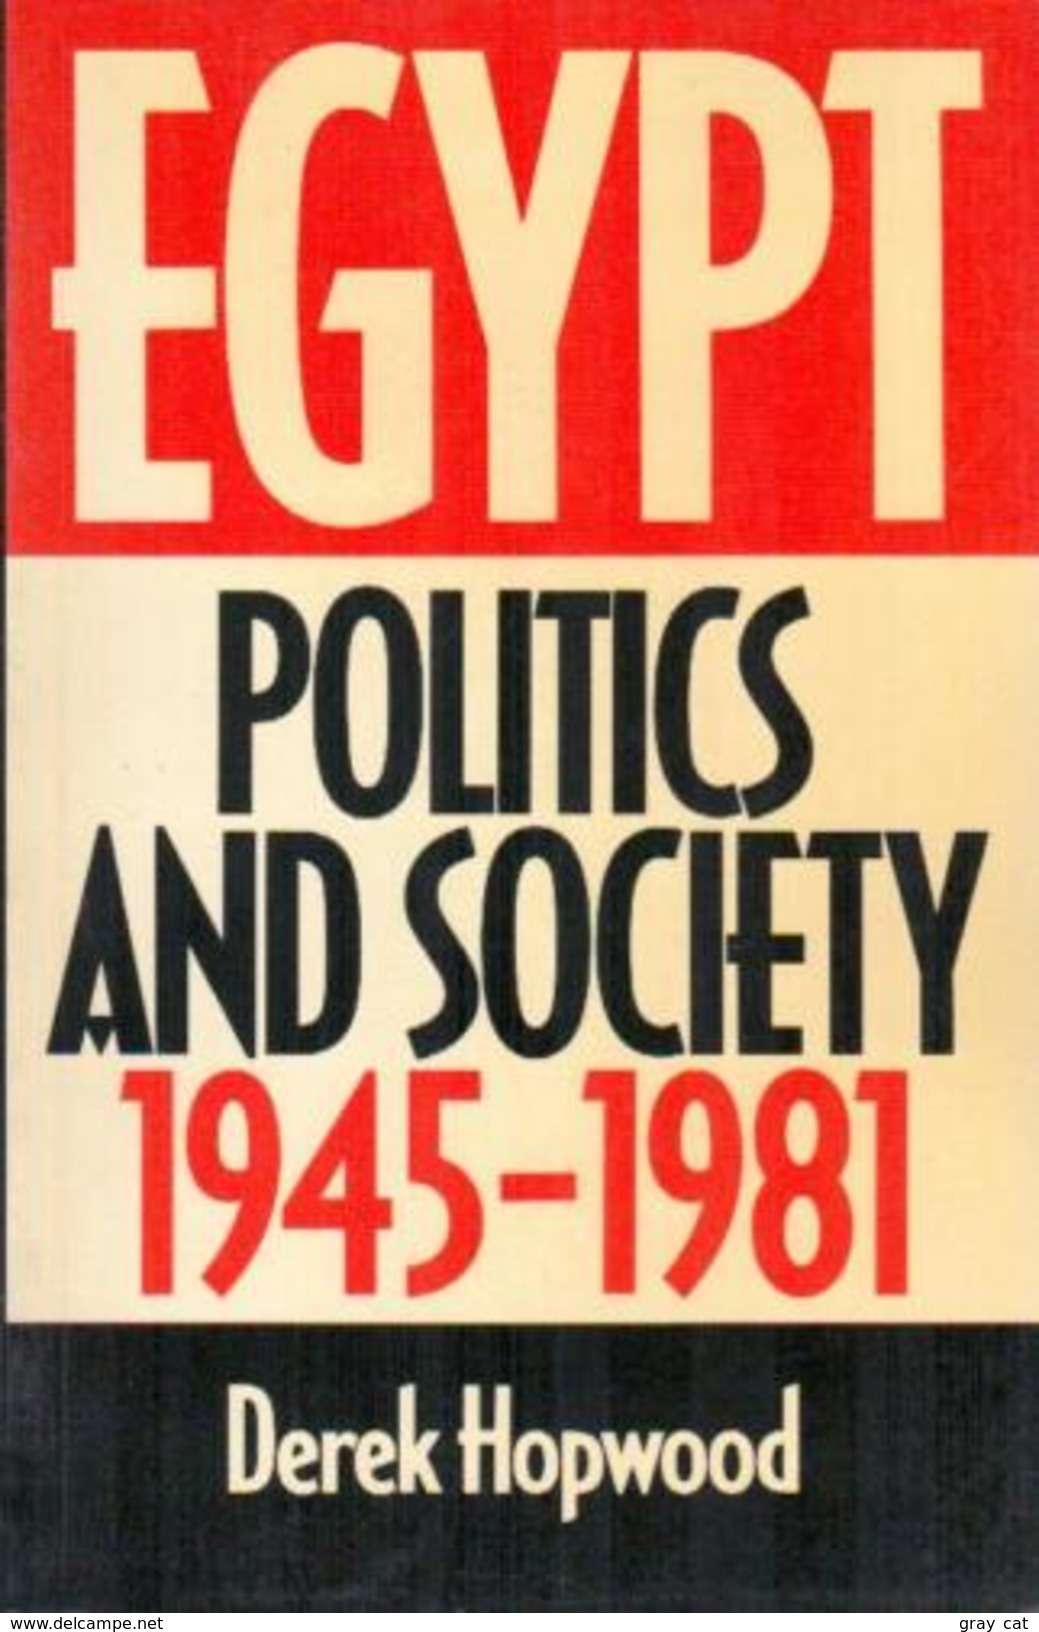 Egypt: Politics And Society 1945-1981 By Derek Hopwood (ISBN 9780049560123) - Middle East